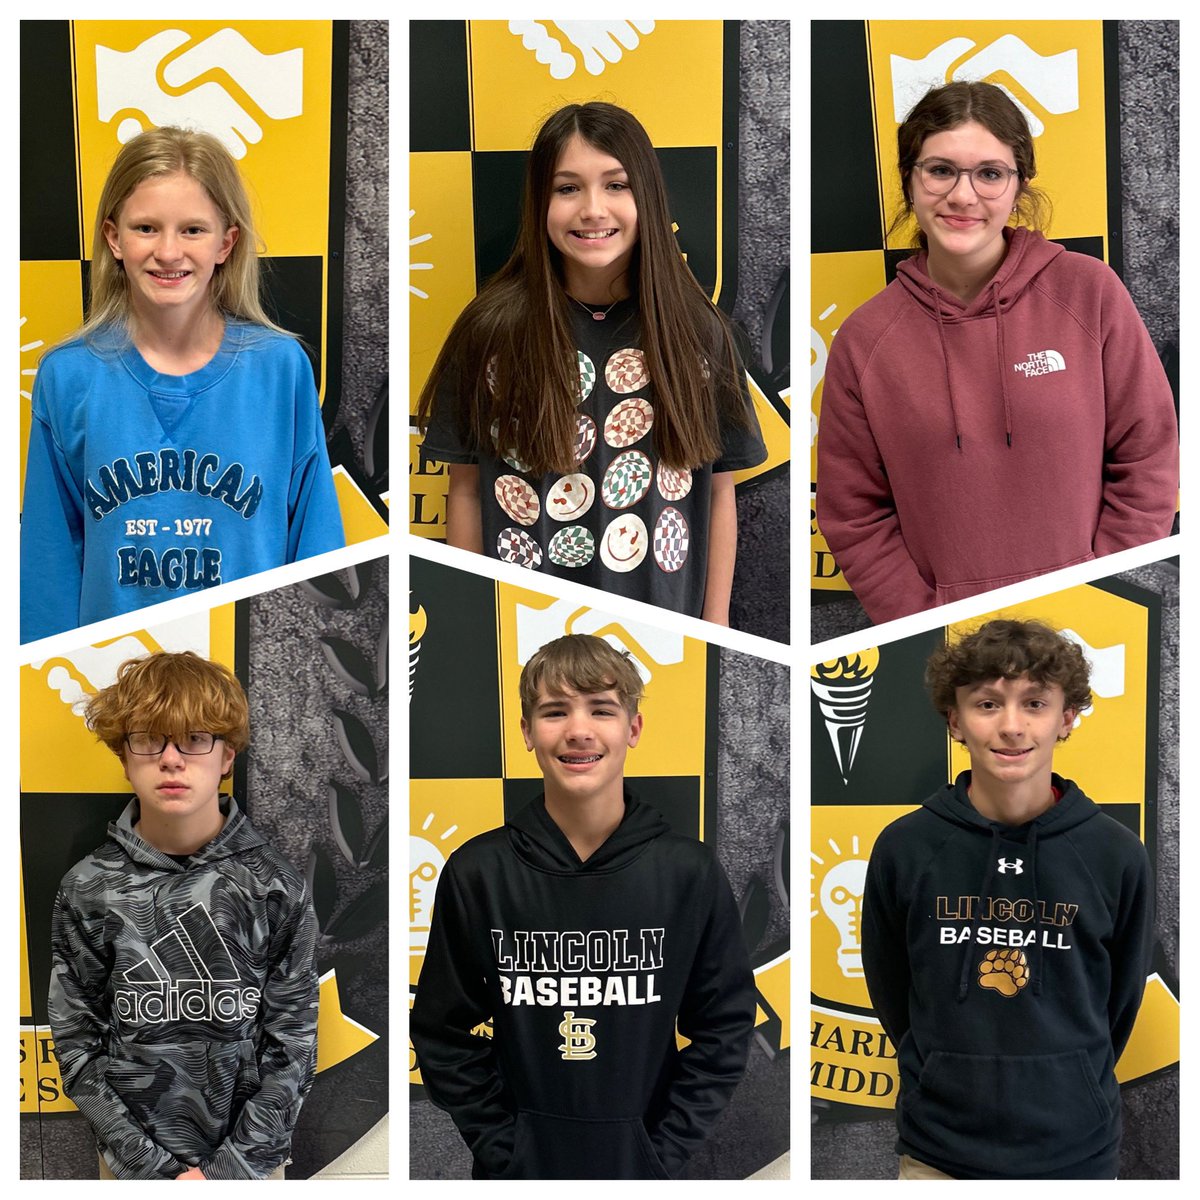 Congratulations to our Students of the Week!! #theDREWway